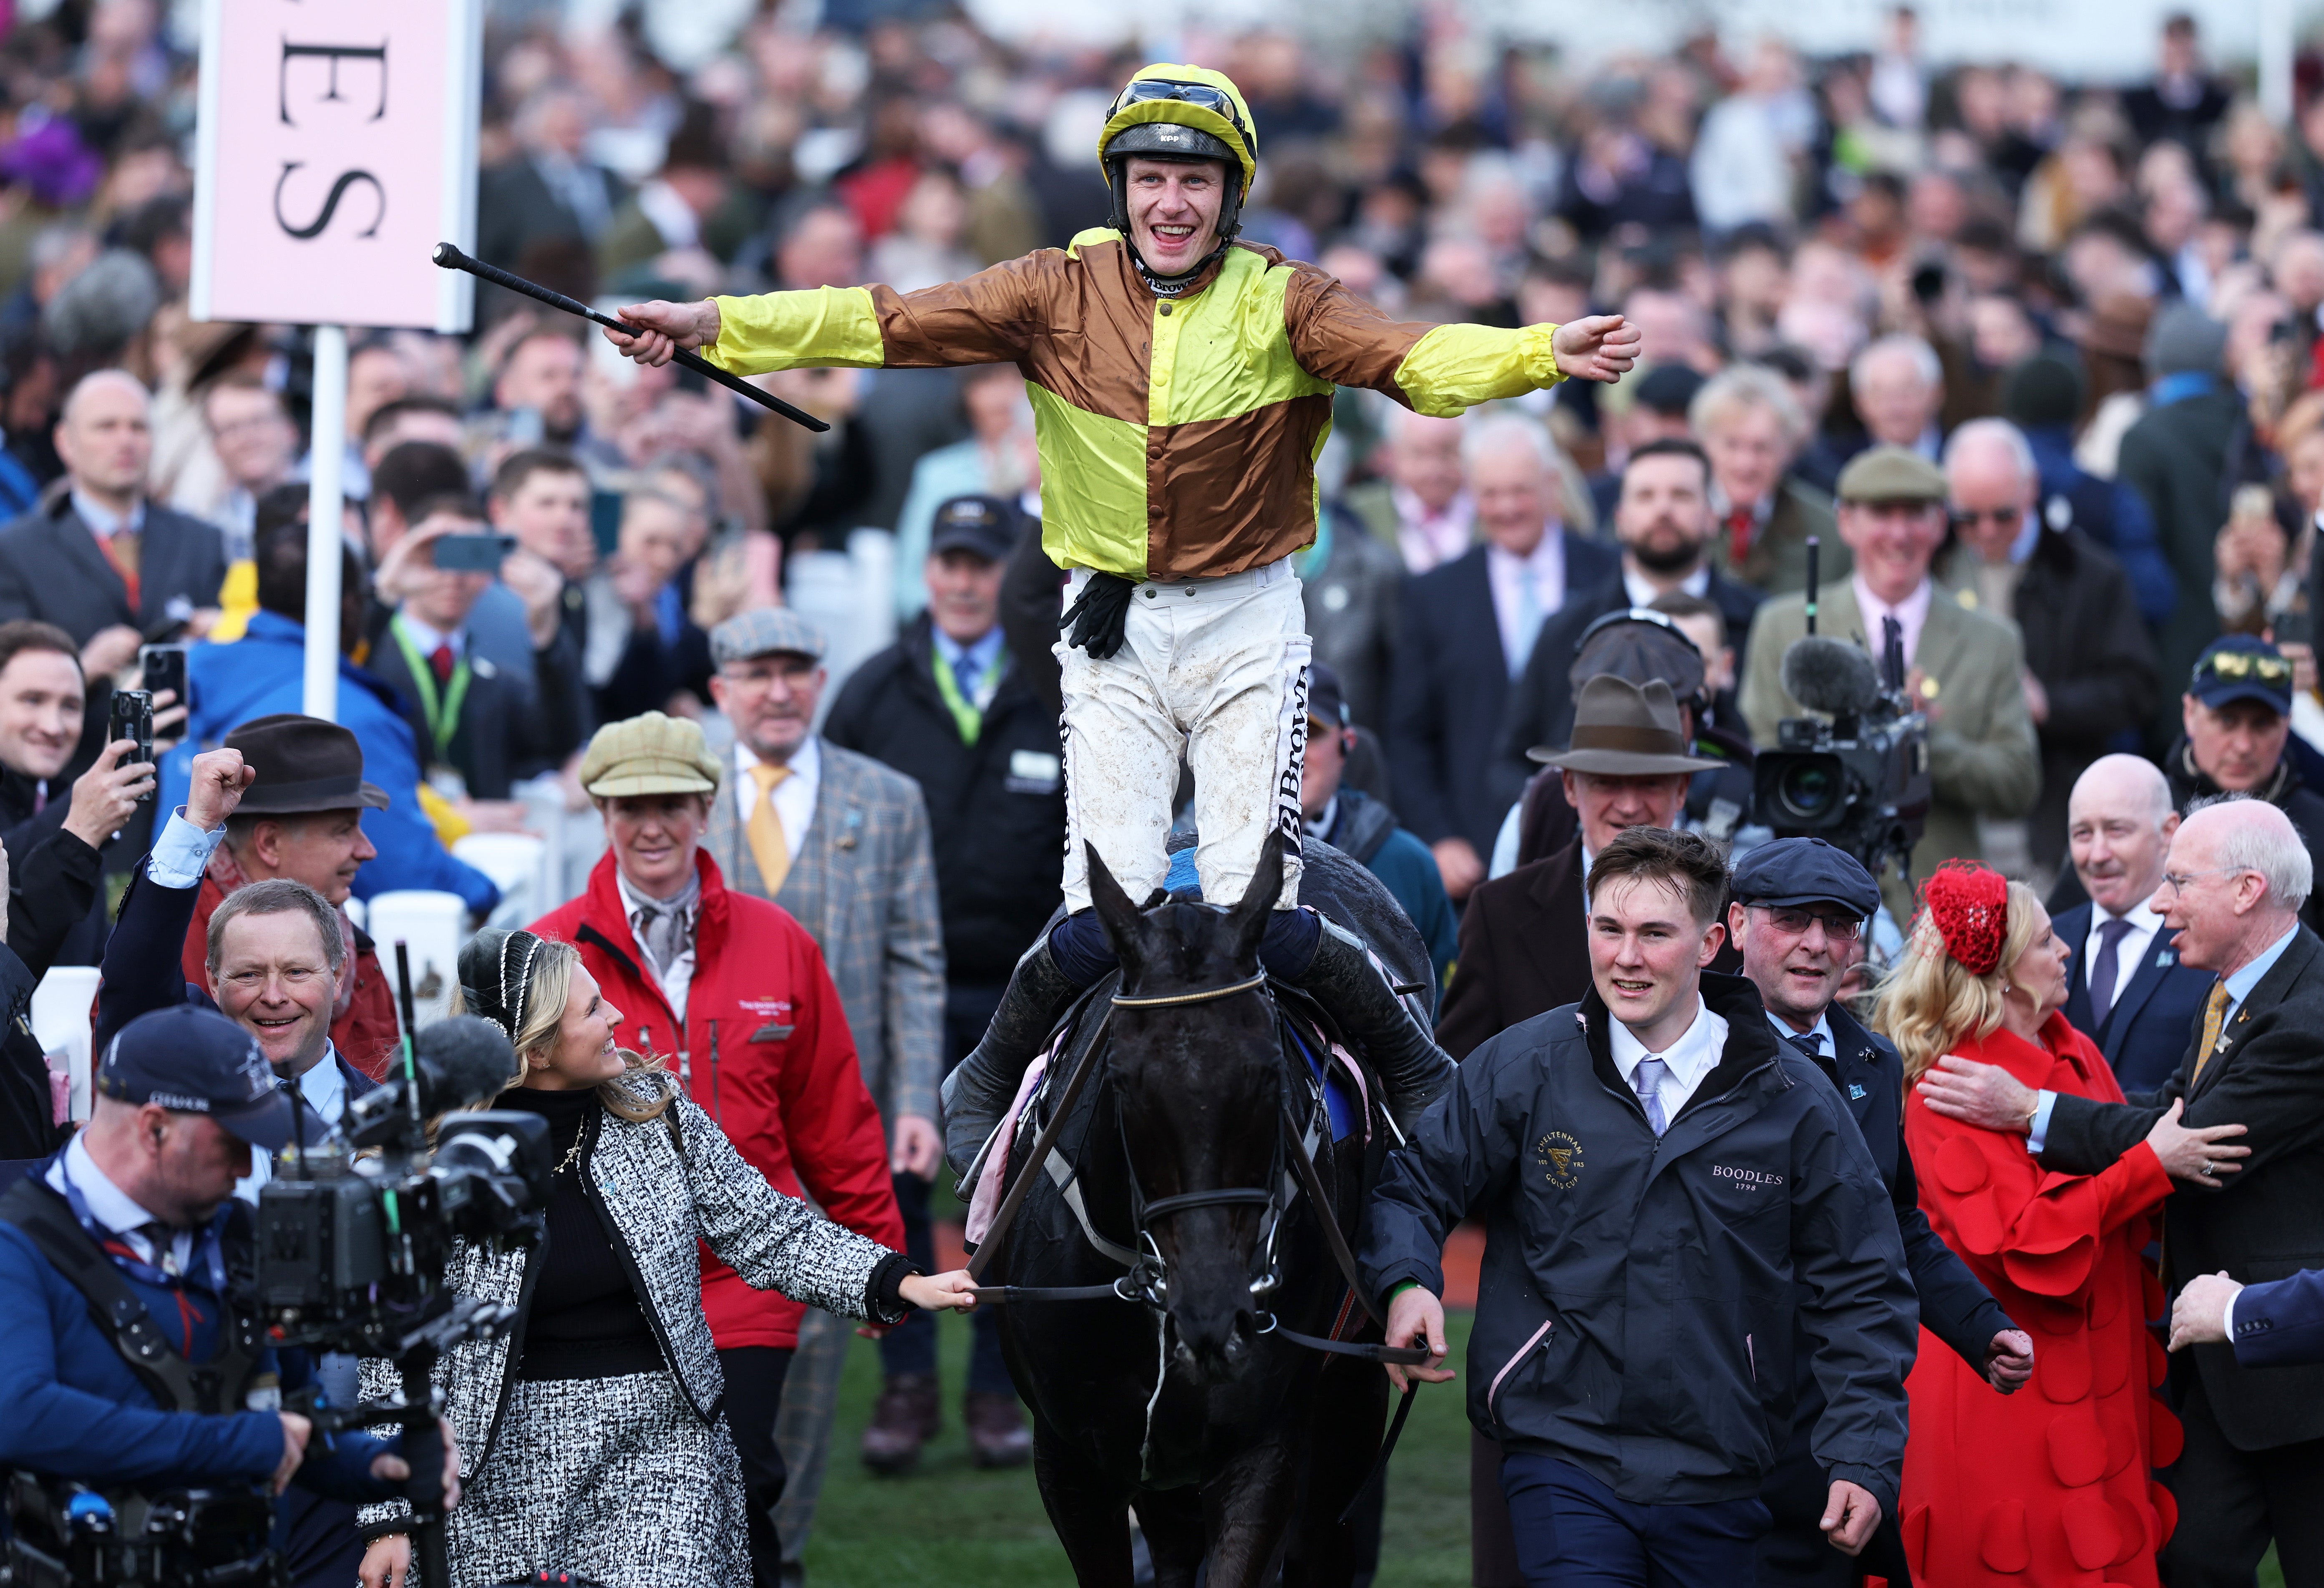 Galopin Des Champs and Paul Townend made history in the Cheltenham Gold Cup